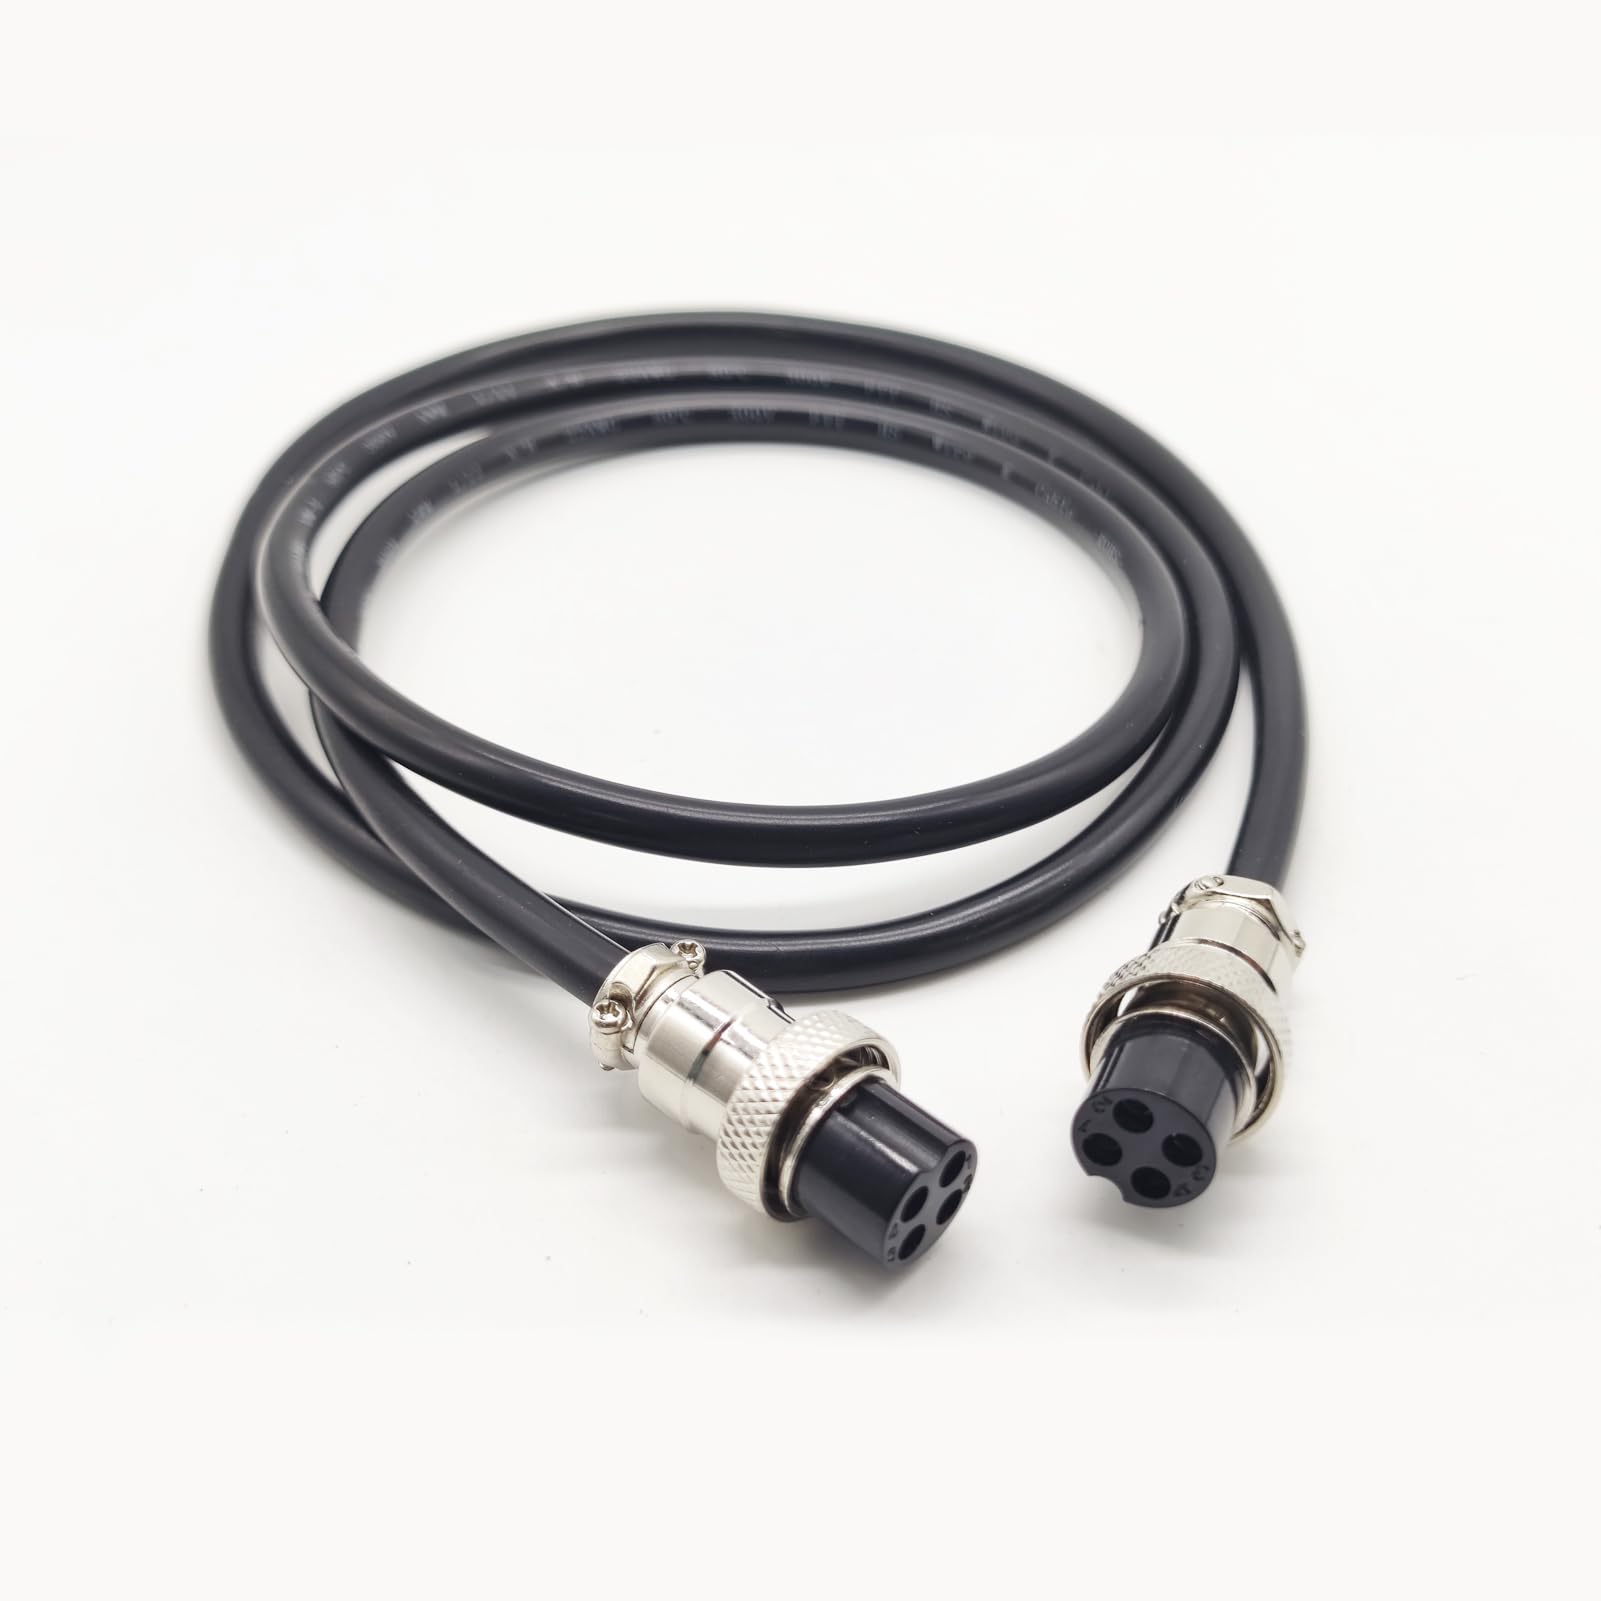 3.28 ft GX16 4 Pin Cable Double Female Head Aviation Cordset, GX16 4 Pin Panel Mount Circular Metal Aviation Connector Adapter Female to Female 20AWG (1Meter)